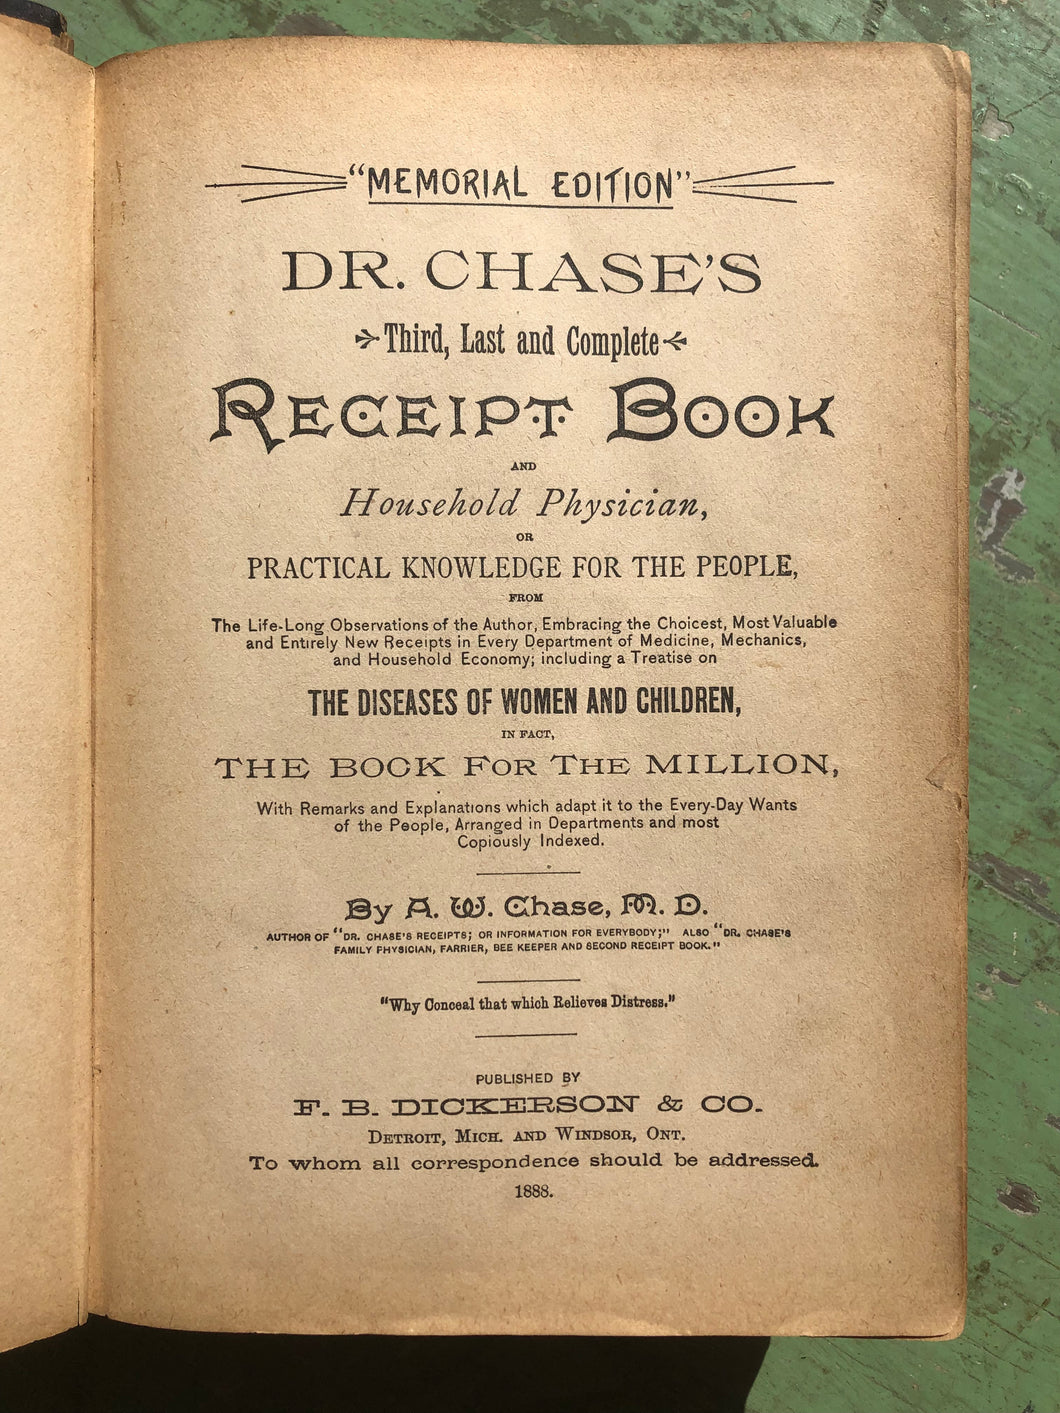 Dr. Chase's Third, Last and Complete Receipt Book and Household Physician, Memorial Edition by A. W. Chase